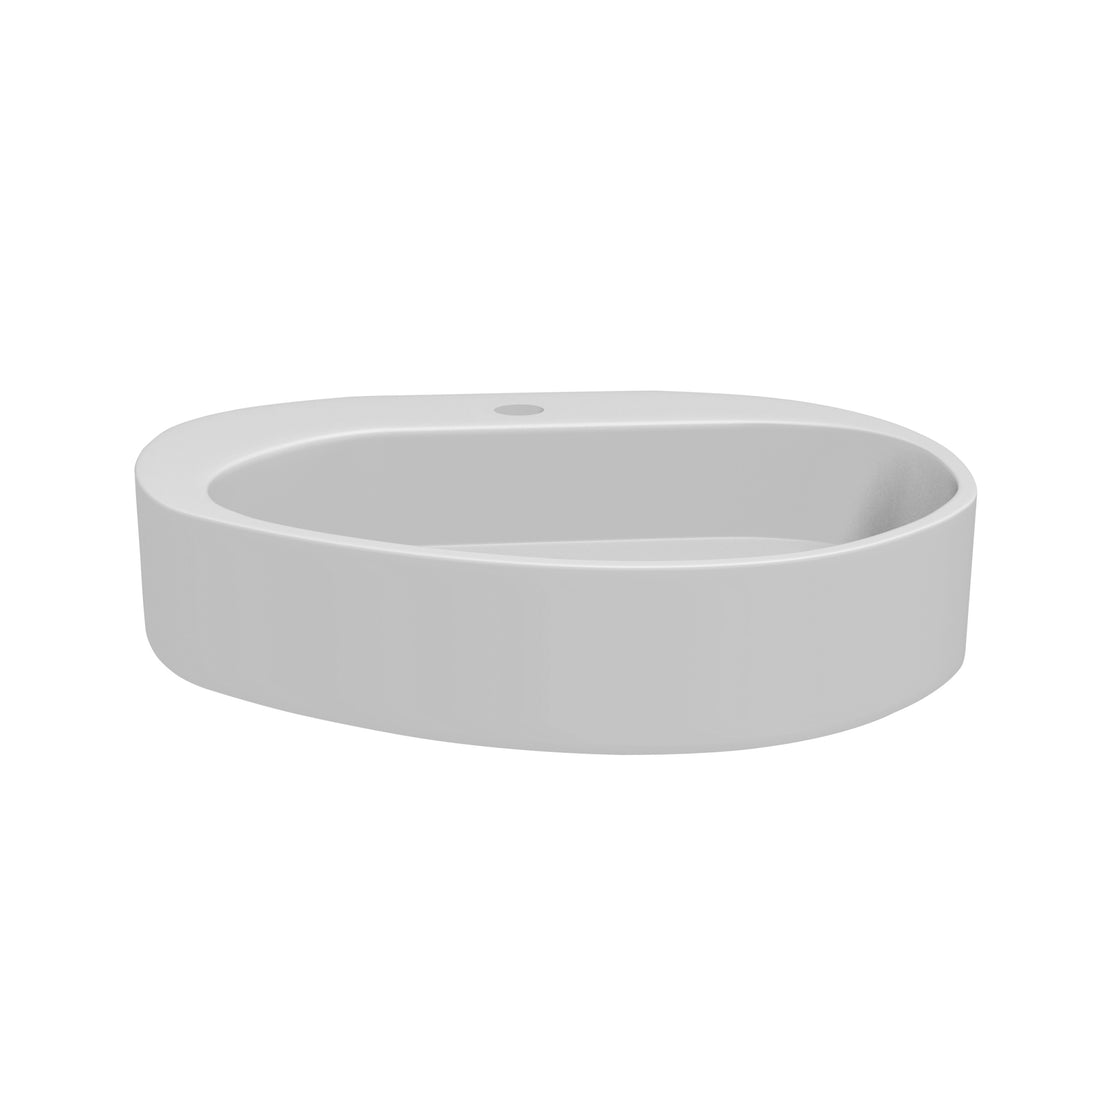 Fs154A 580 Solid Surface Basin With Chrome Drain